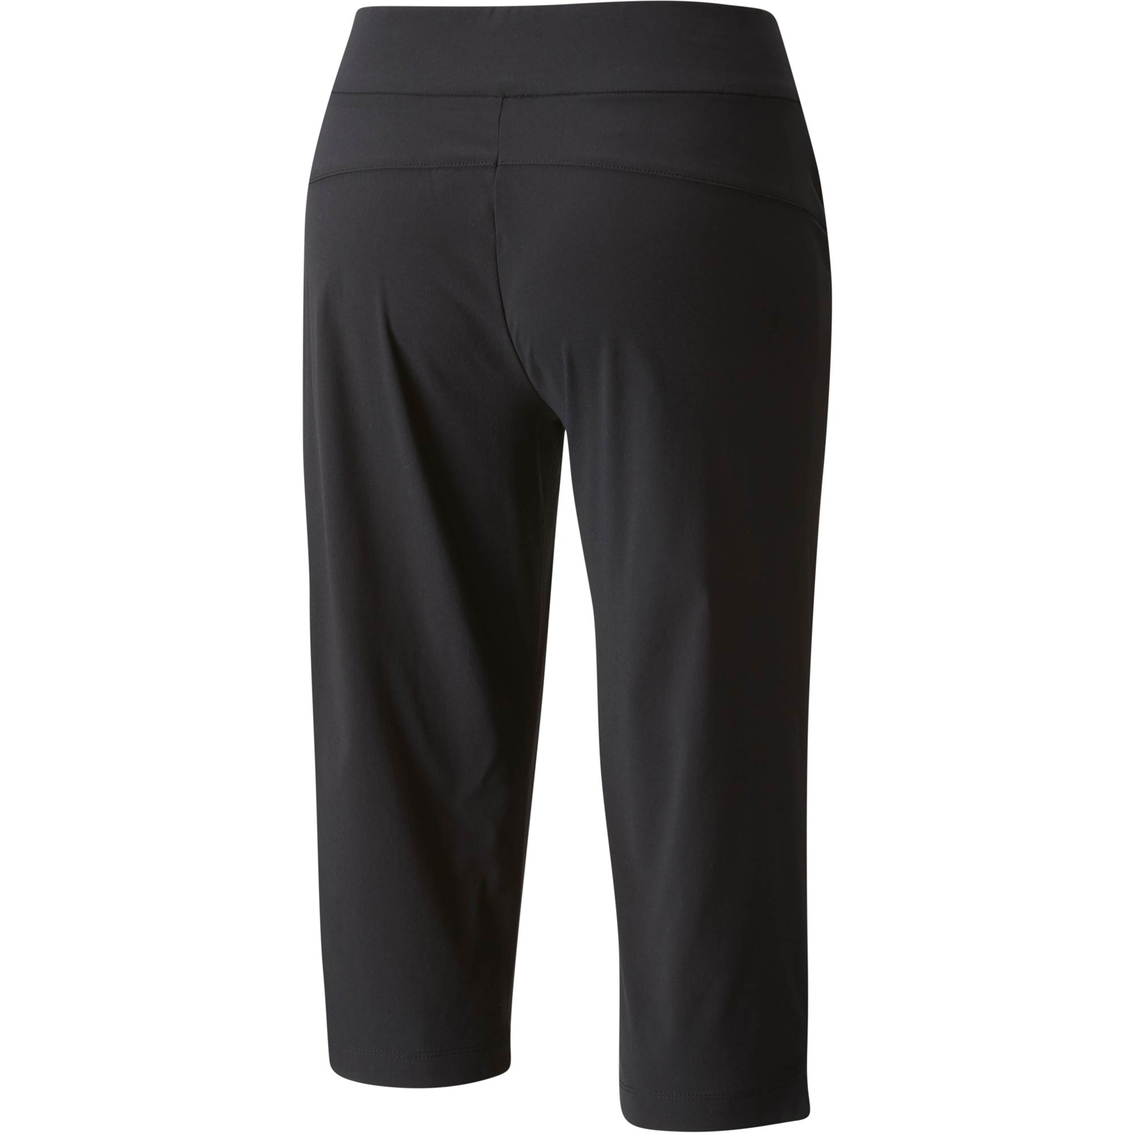 Columbia Plus Size Anytime Casual Capri Pants - Image 2 of 2